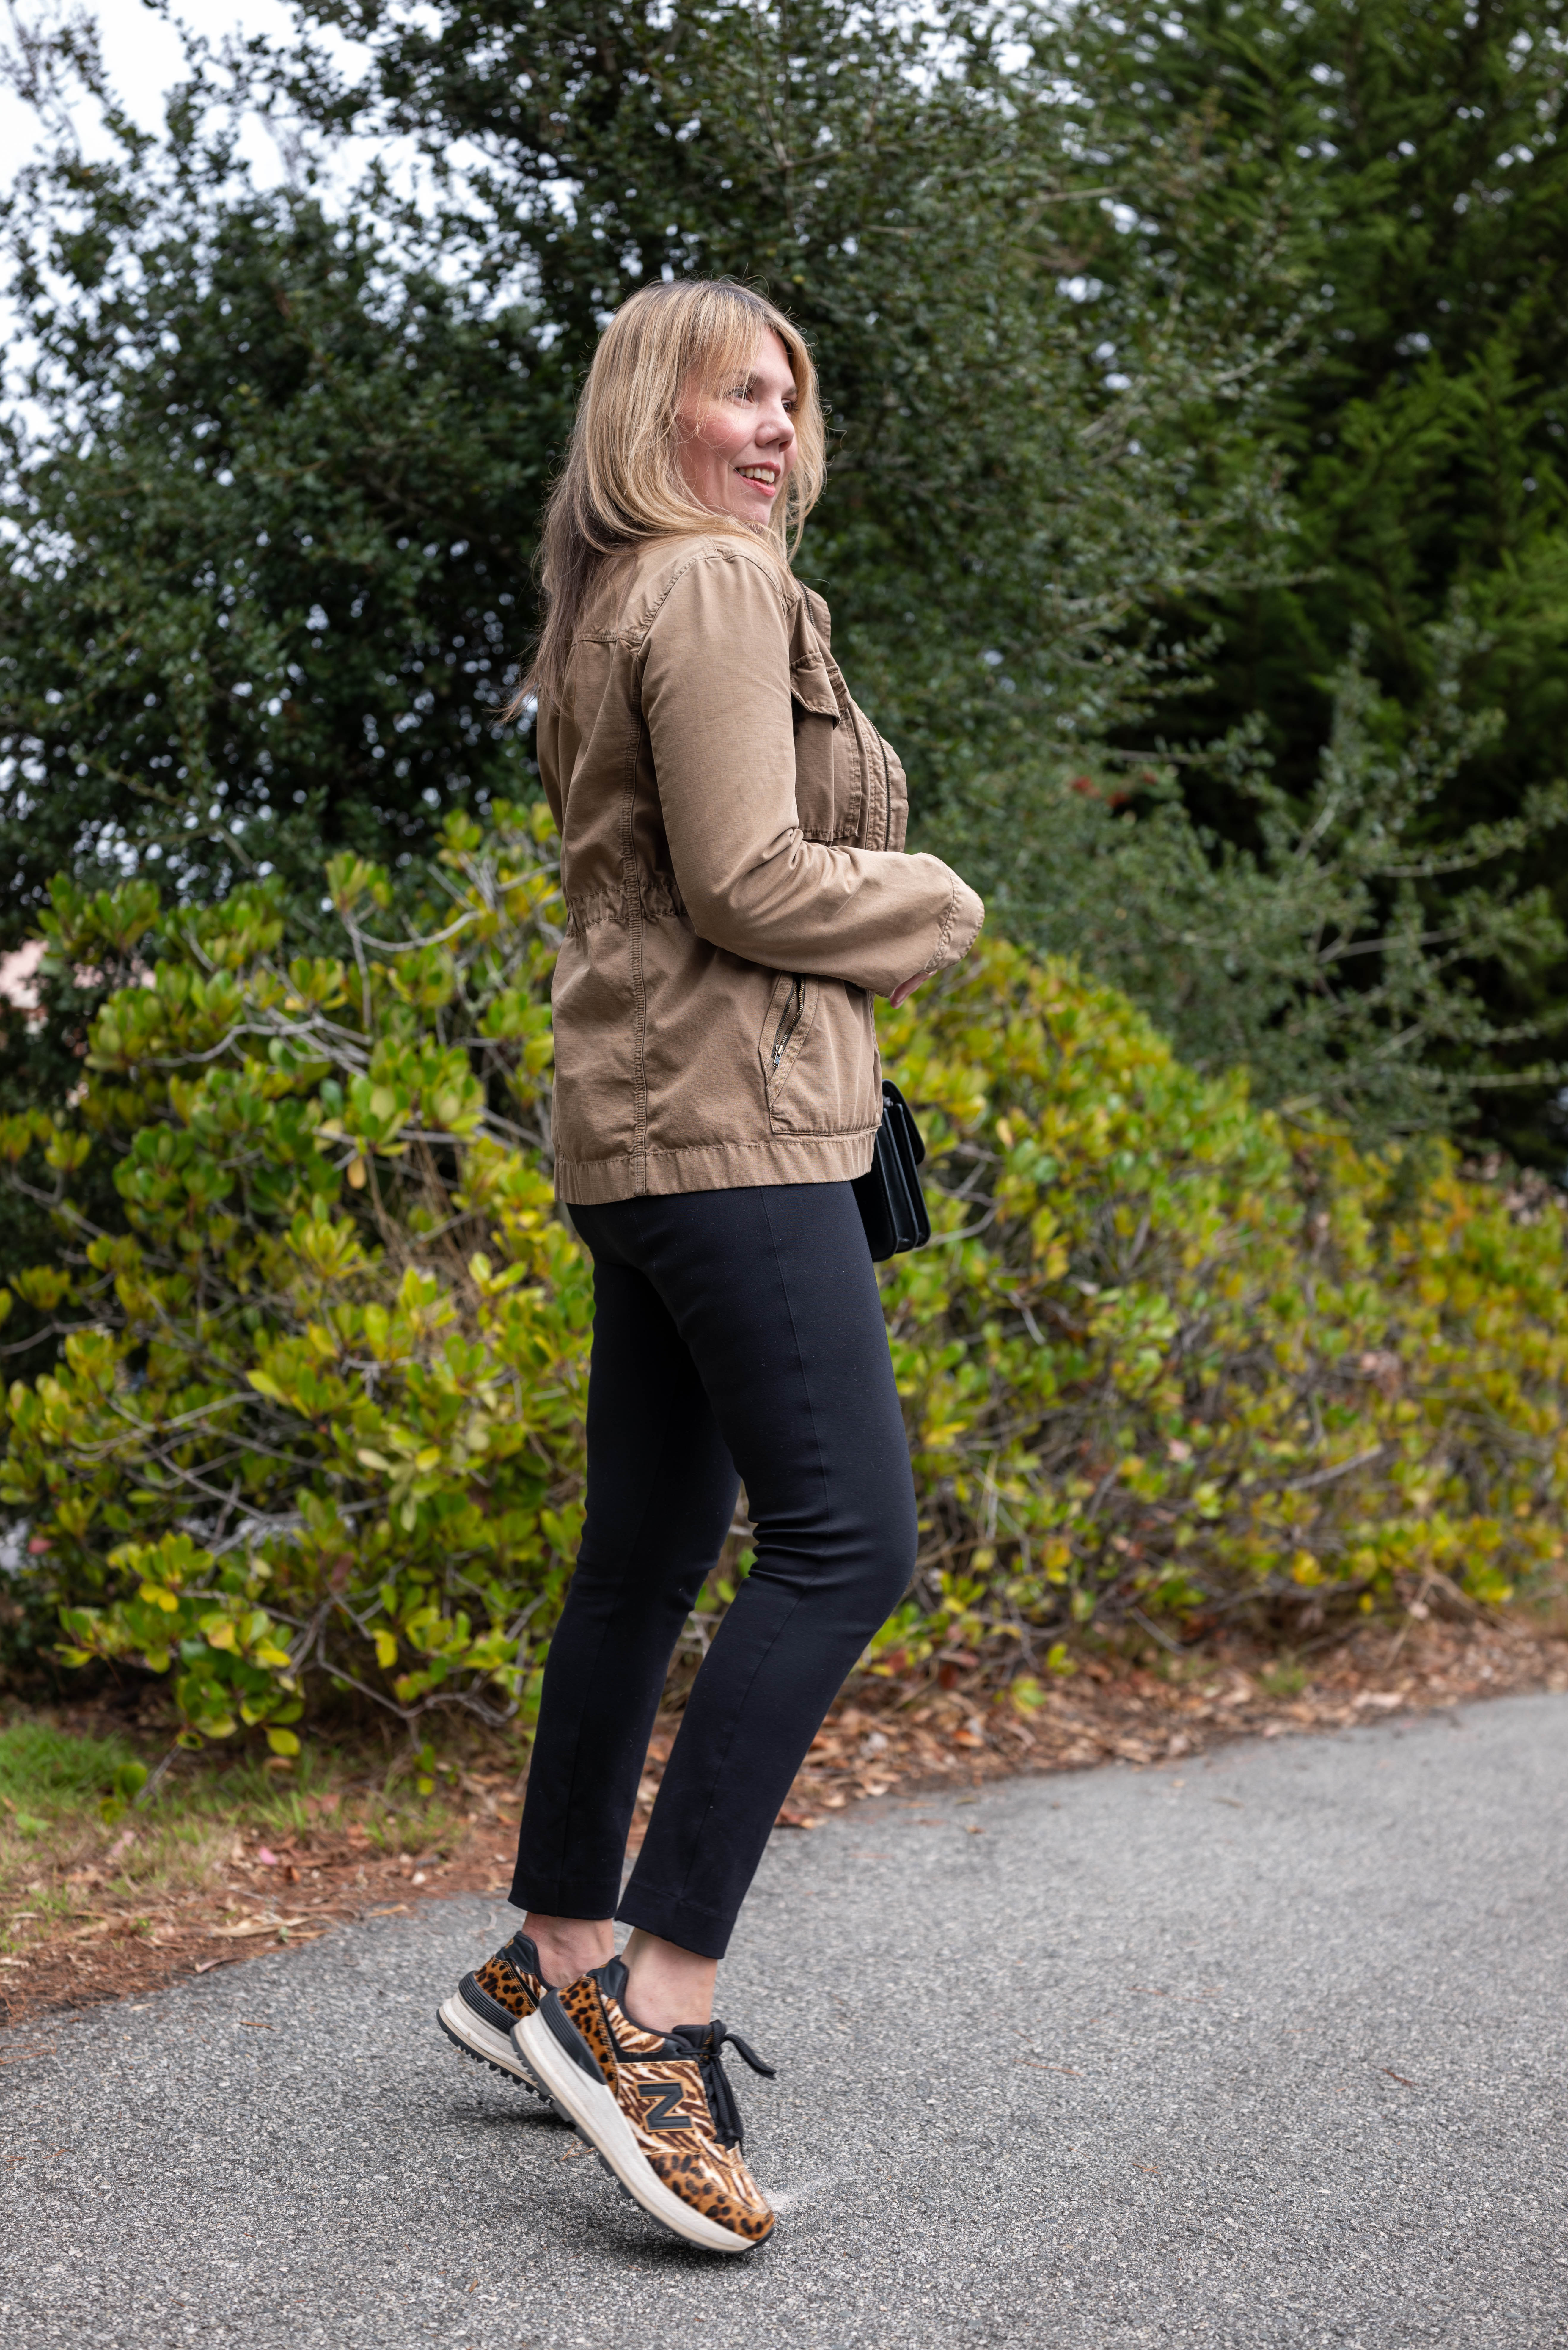 SPANX - Our Saturday checklist: ☀️Sunshine 😍Style 😄Smiles ❤️️Spanx  Backseam Skinny Our Backseam Skinny is machine-washable and pulls on for a  sophisticated look. Polish up your look without ever sacrificing comfort! # Spanx